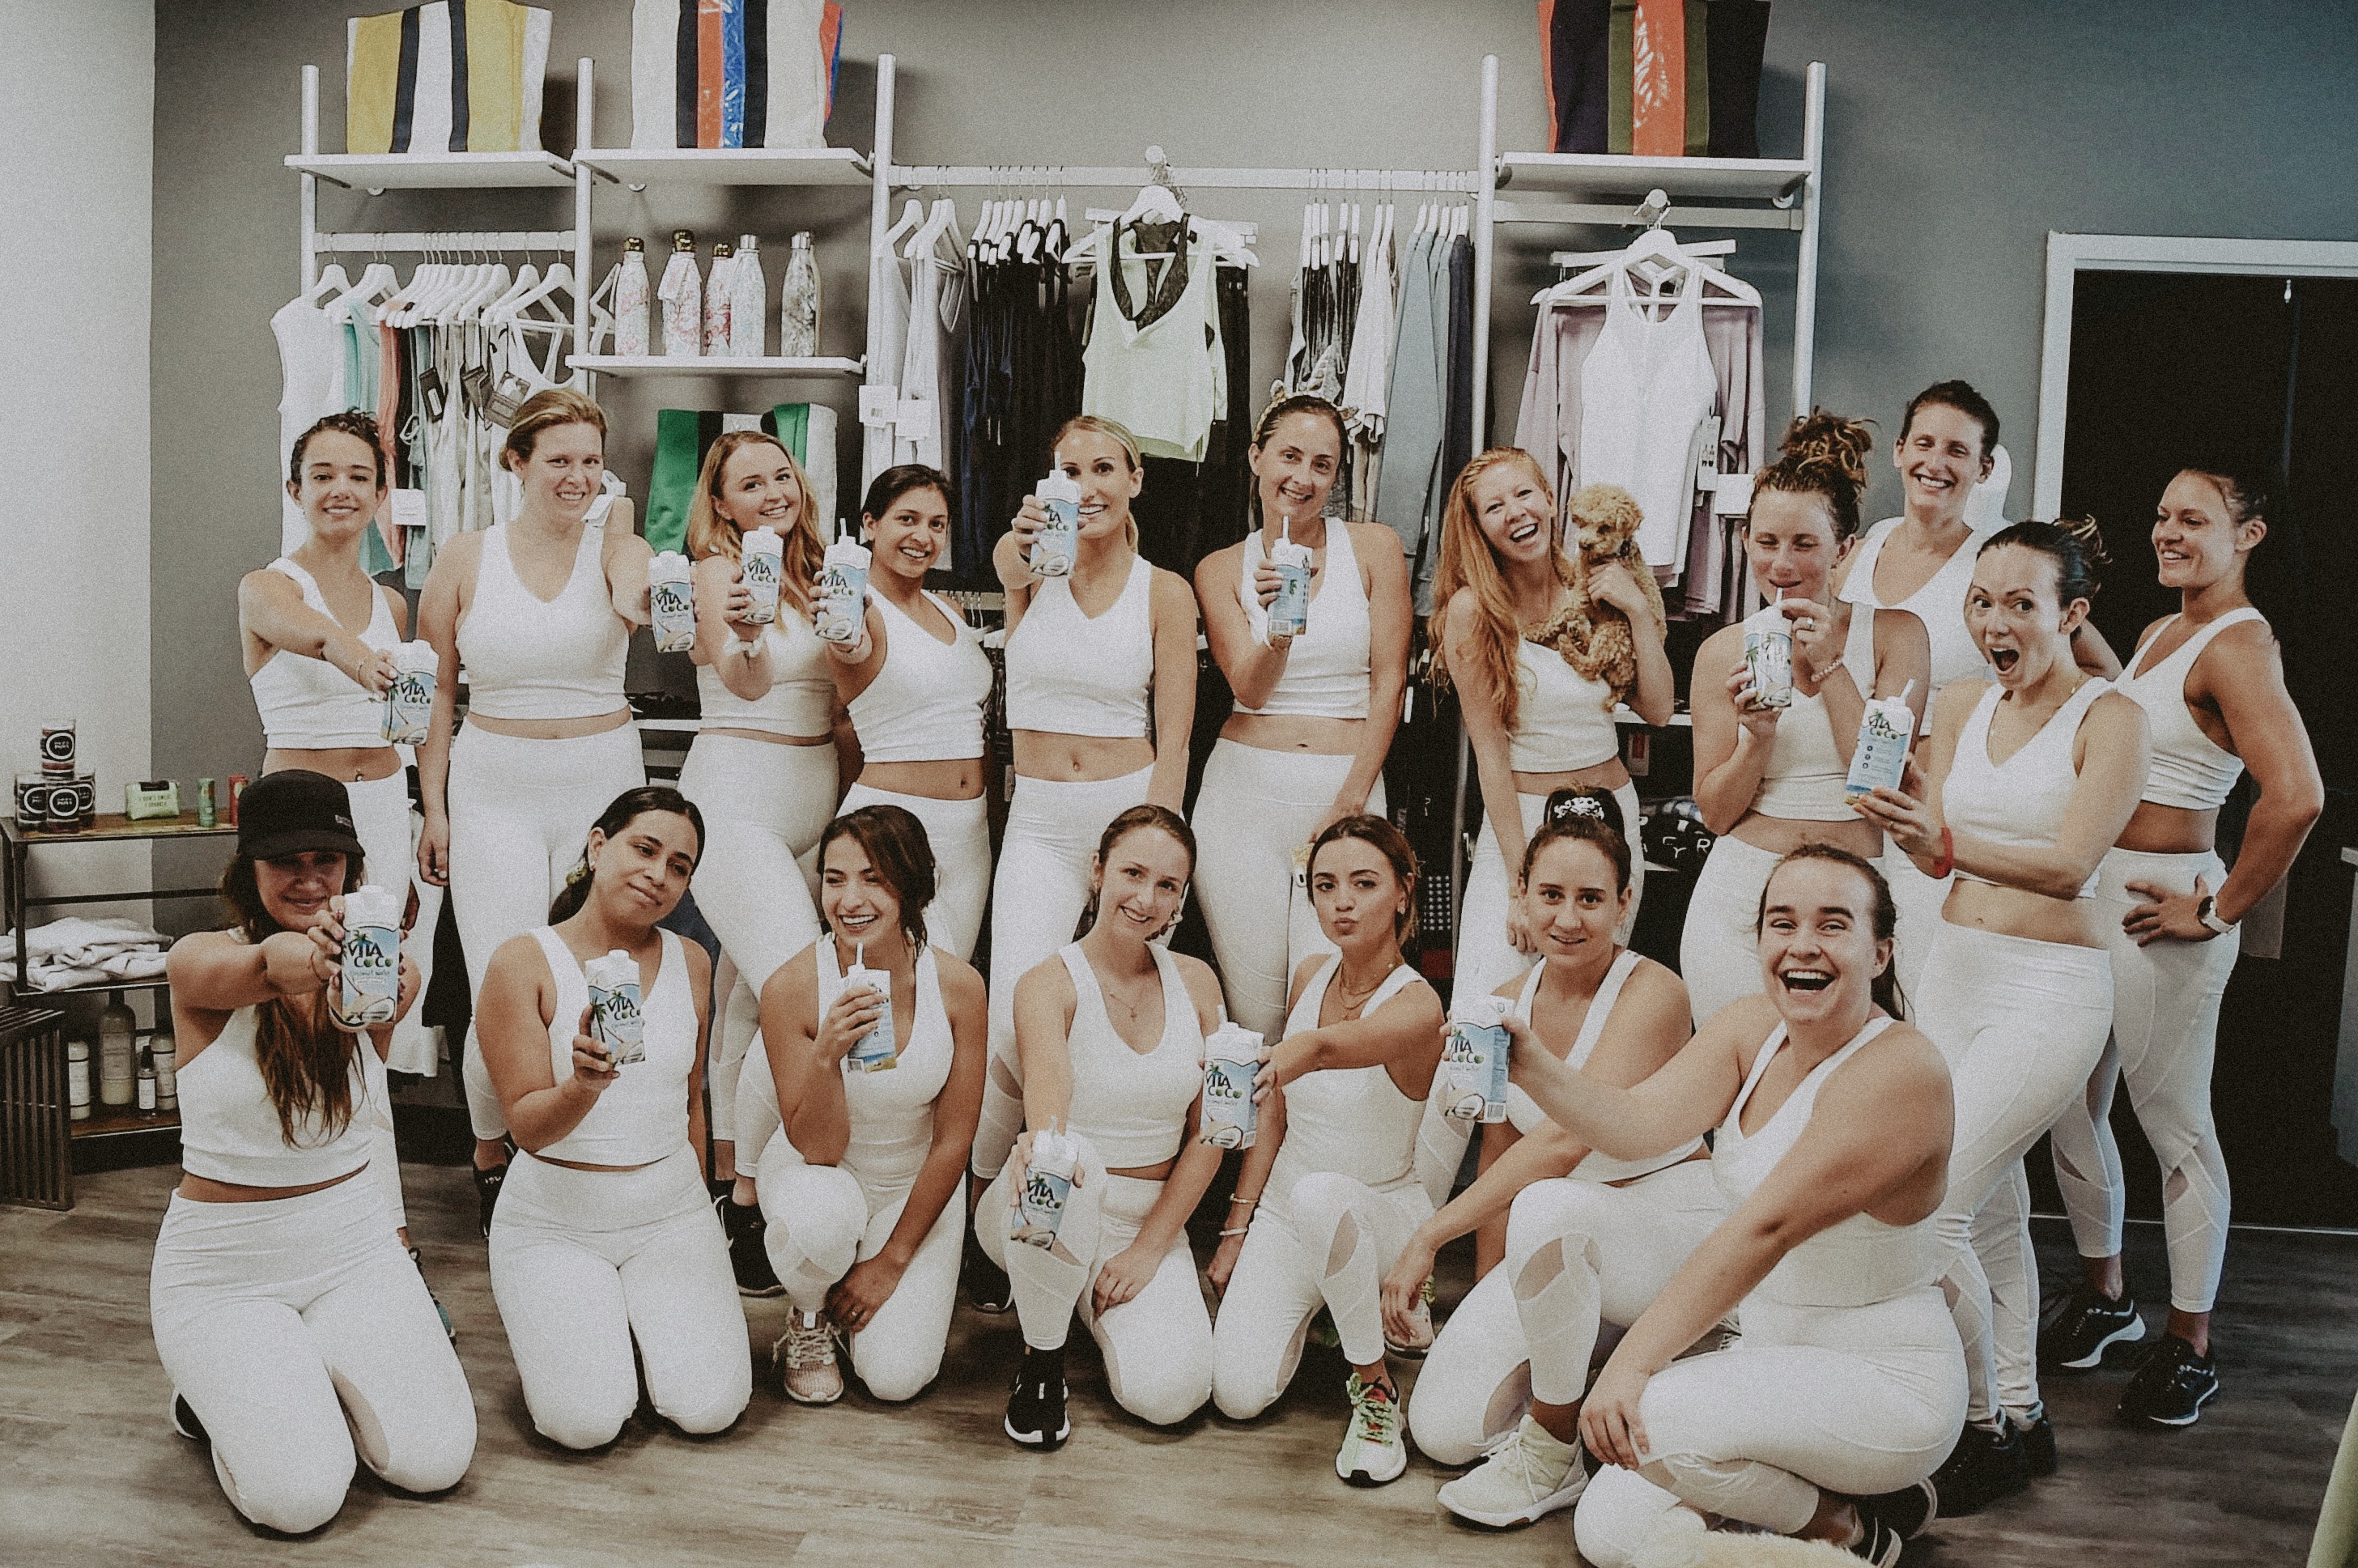 Blogging Tips Hosting an Event Ft. Club Sweat x Sweaty Betty-Fitness-Workout-Blogger Workout-All White-White Party #fitness #lifestyle #events #westchesterbloggerbabes #greenwich #ctbloggers #sweatybetty #vitacoco #workoutstyle #workoutoutfit #workoutclass 